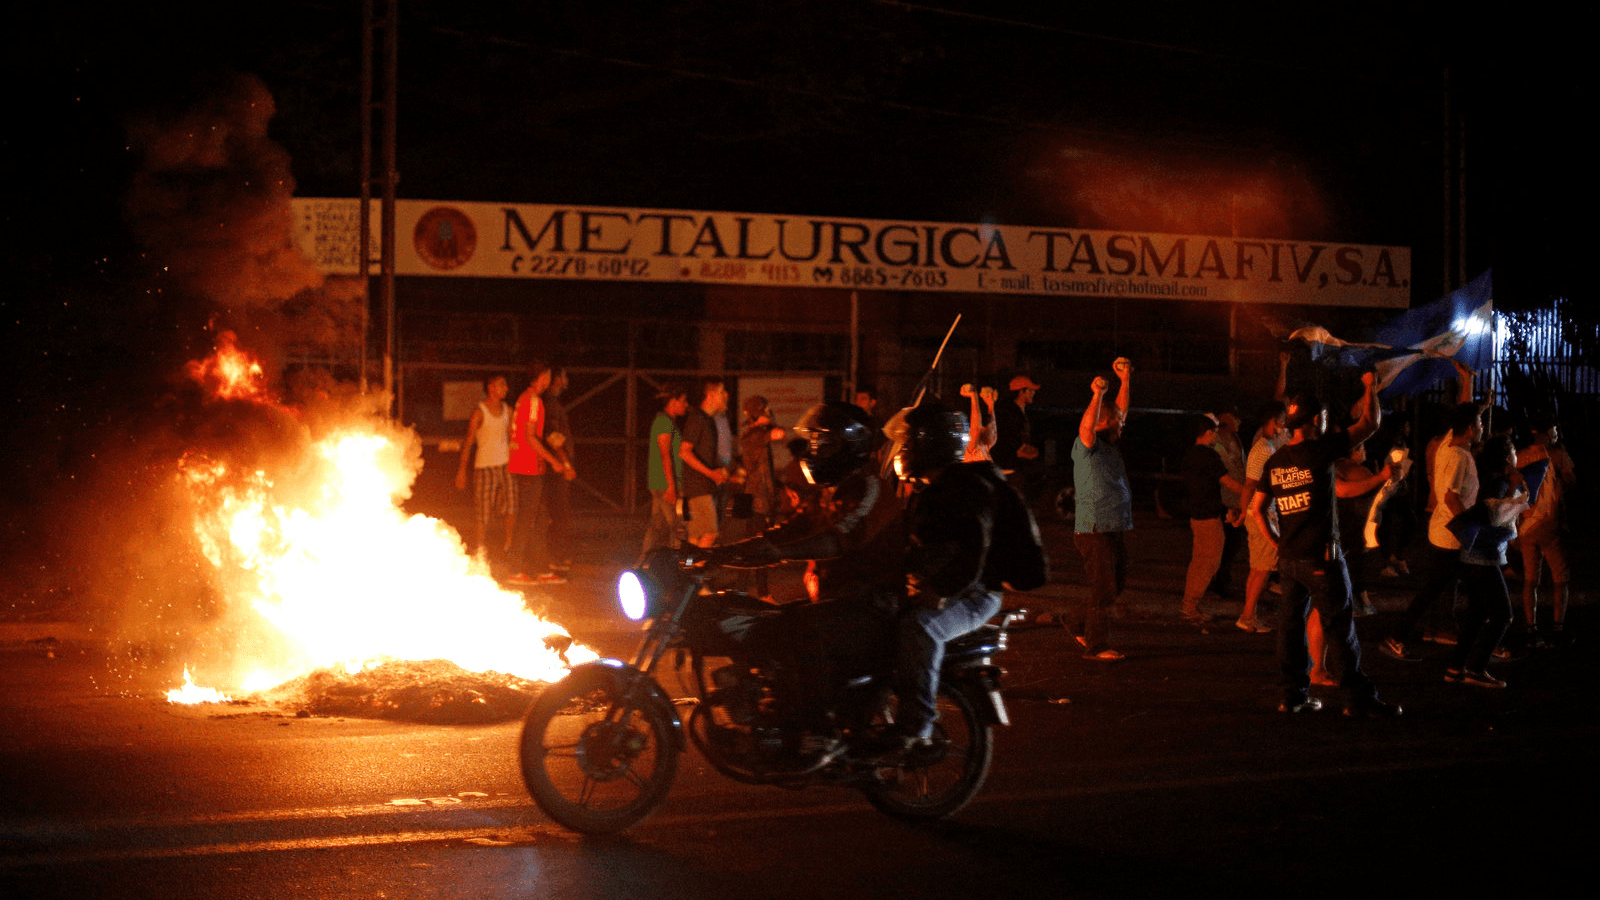 Demonstrators shout next to a burning barricade as they take part in a protest over a controversial reform to the pension plans of the Nicaraguan Social Security Institute (INSS) in Managua, Nicaragua April 21, 2018.